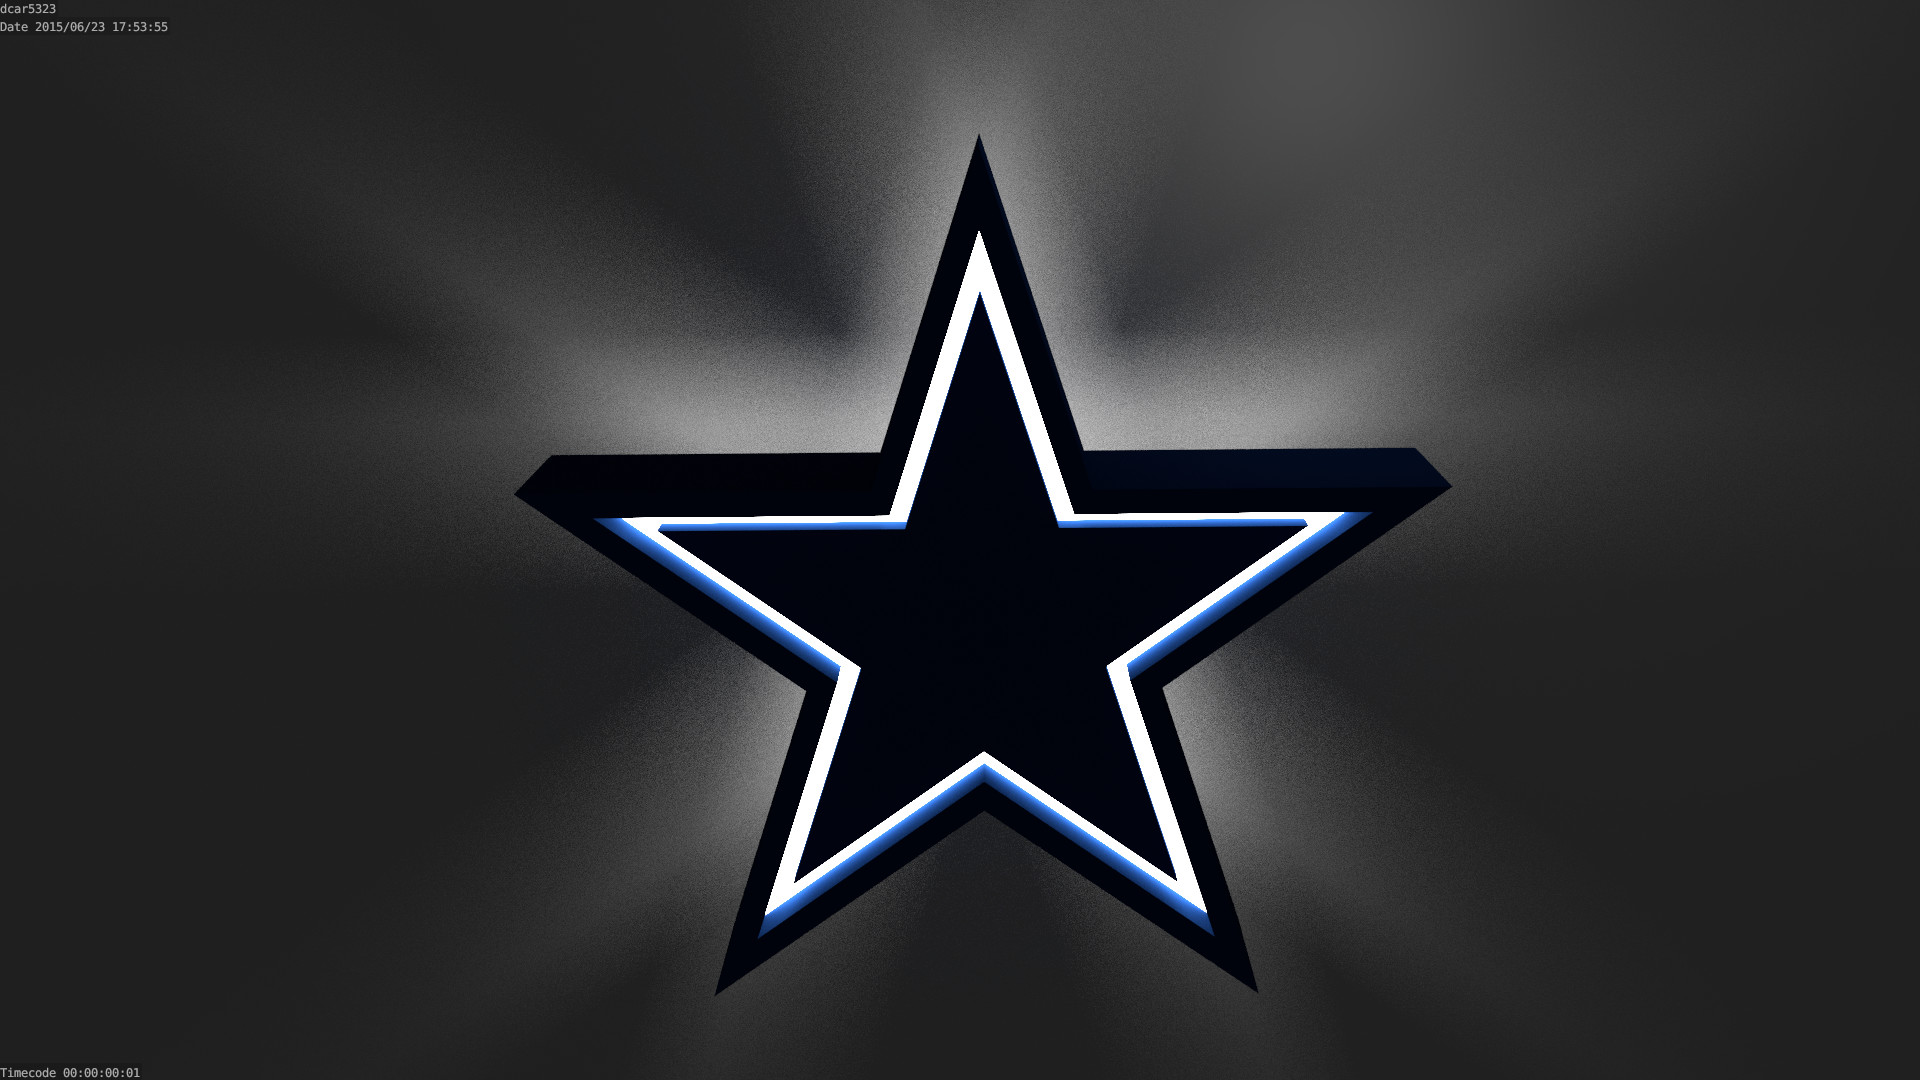 Im learning how to 3D Model, so Im recreating NFL logos as practice. Heres the Cowboys logo